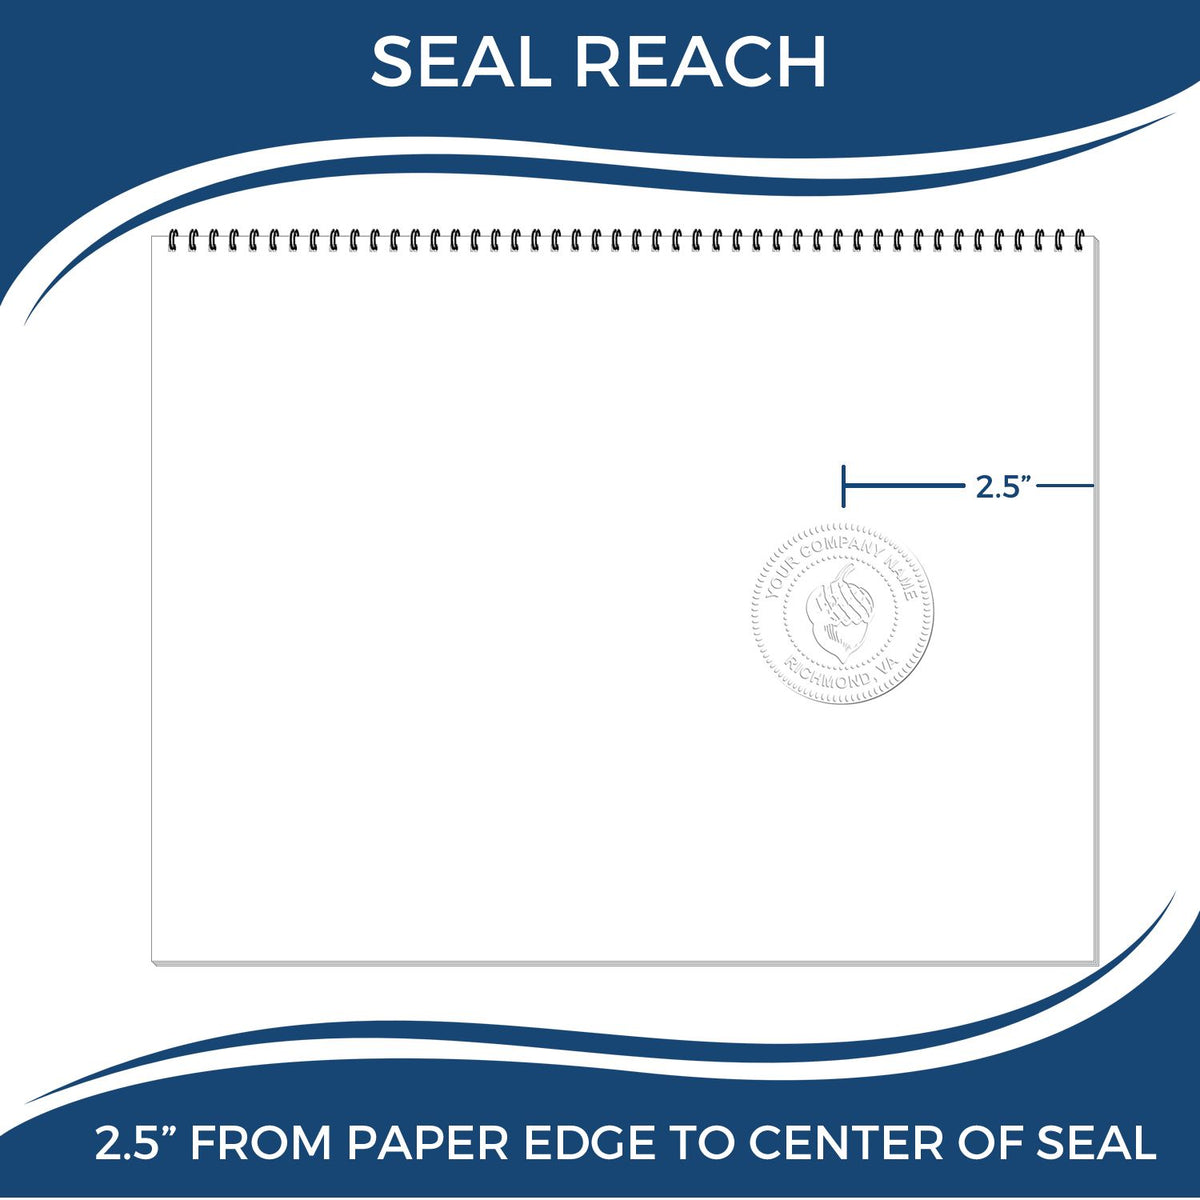 An infographic showing the seal reach which is represented by a ruler and a miniature seal image of the Heavy Duty Cast Iron Georgia Engineer Seal Embosser